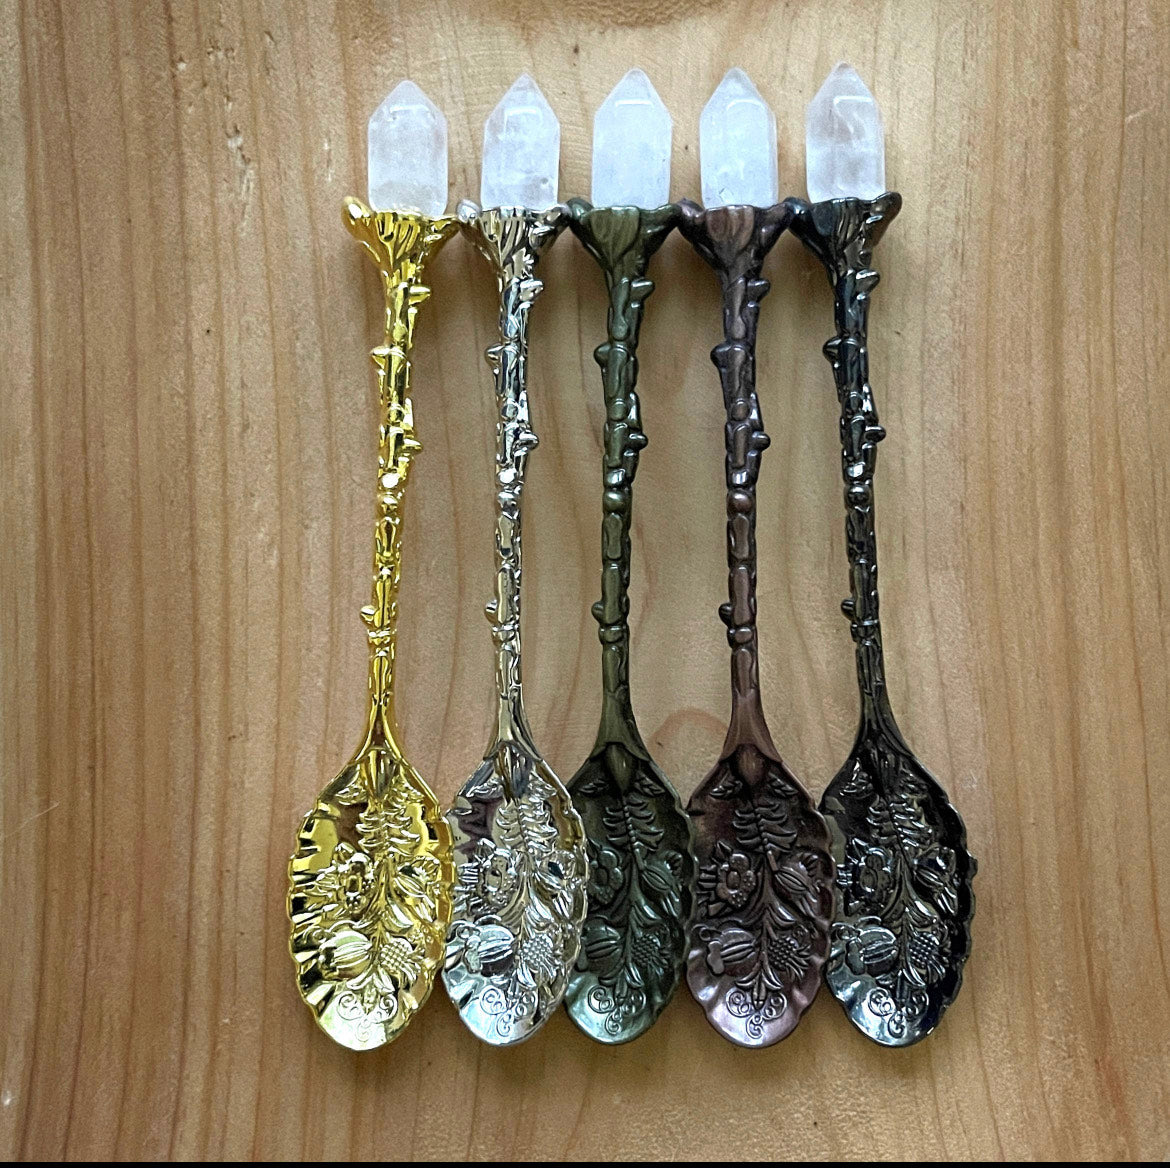 Clear Quartz Crystal Witchy Herb / Apothecary Spoons